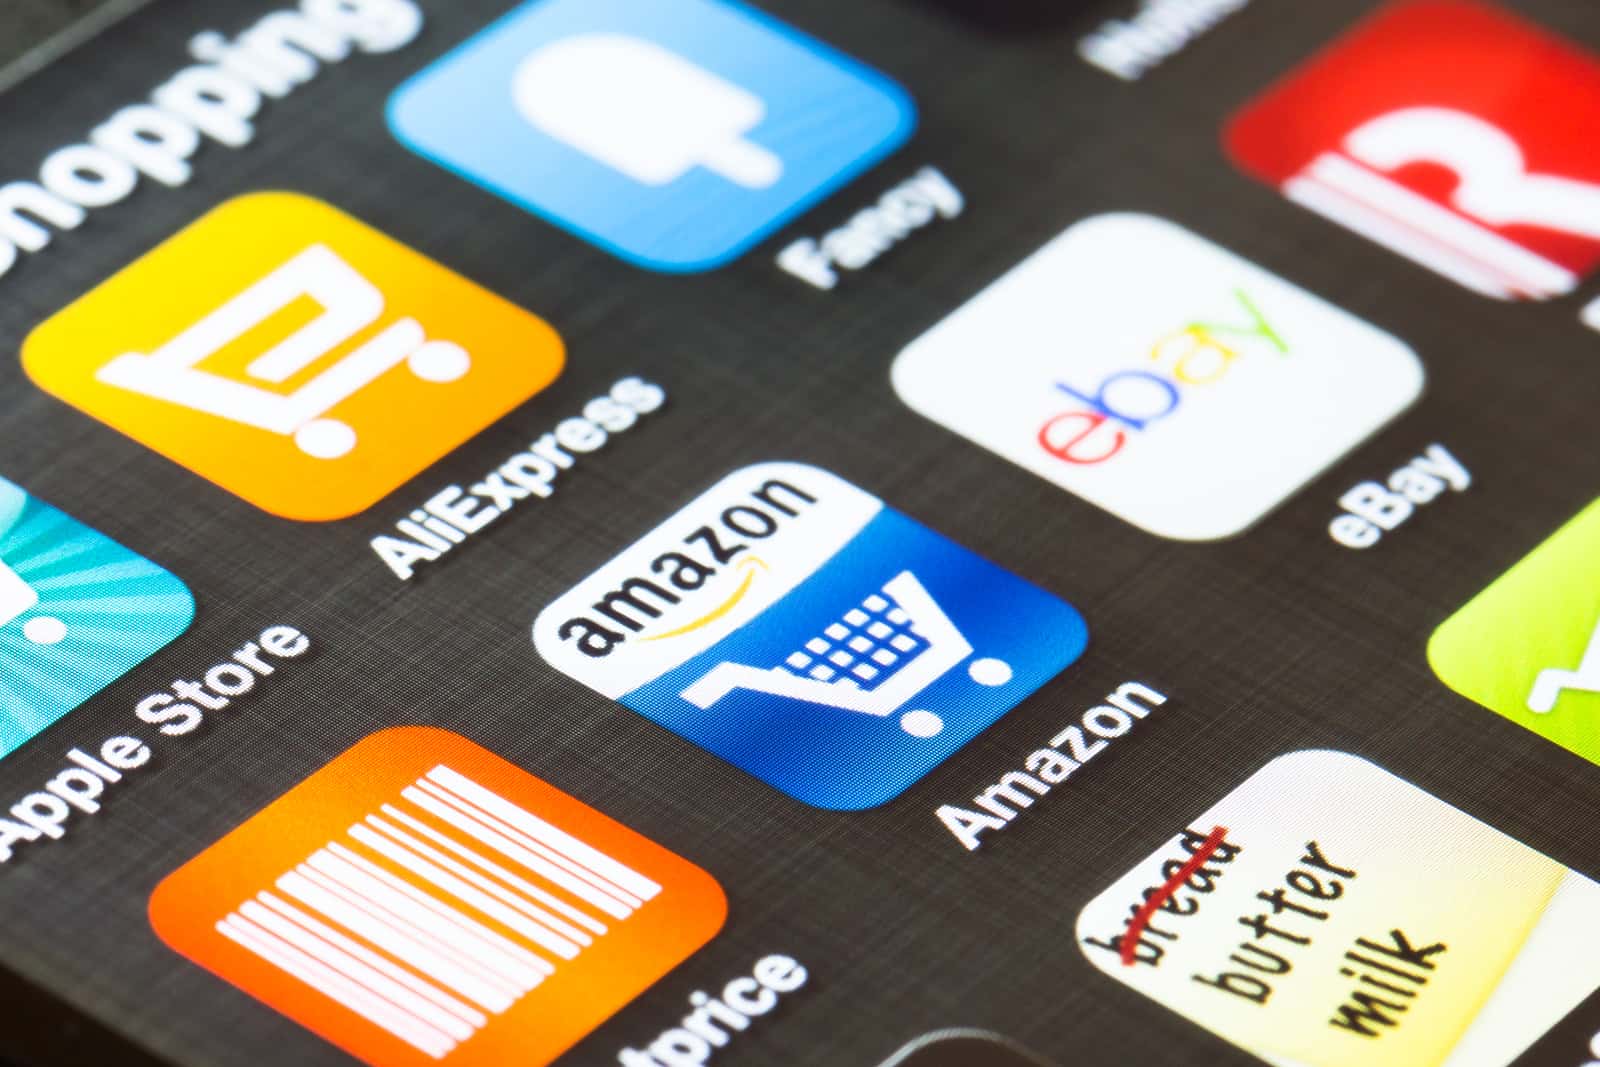 Online marketplaces expected to grow by 15 per cent annually